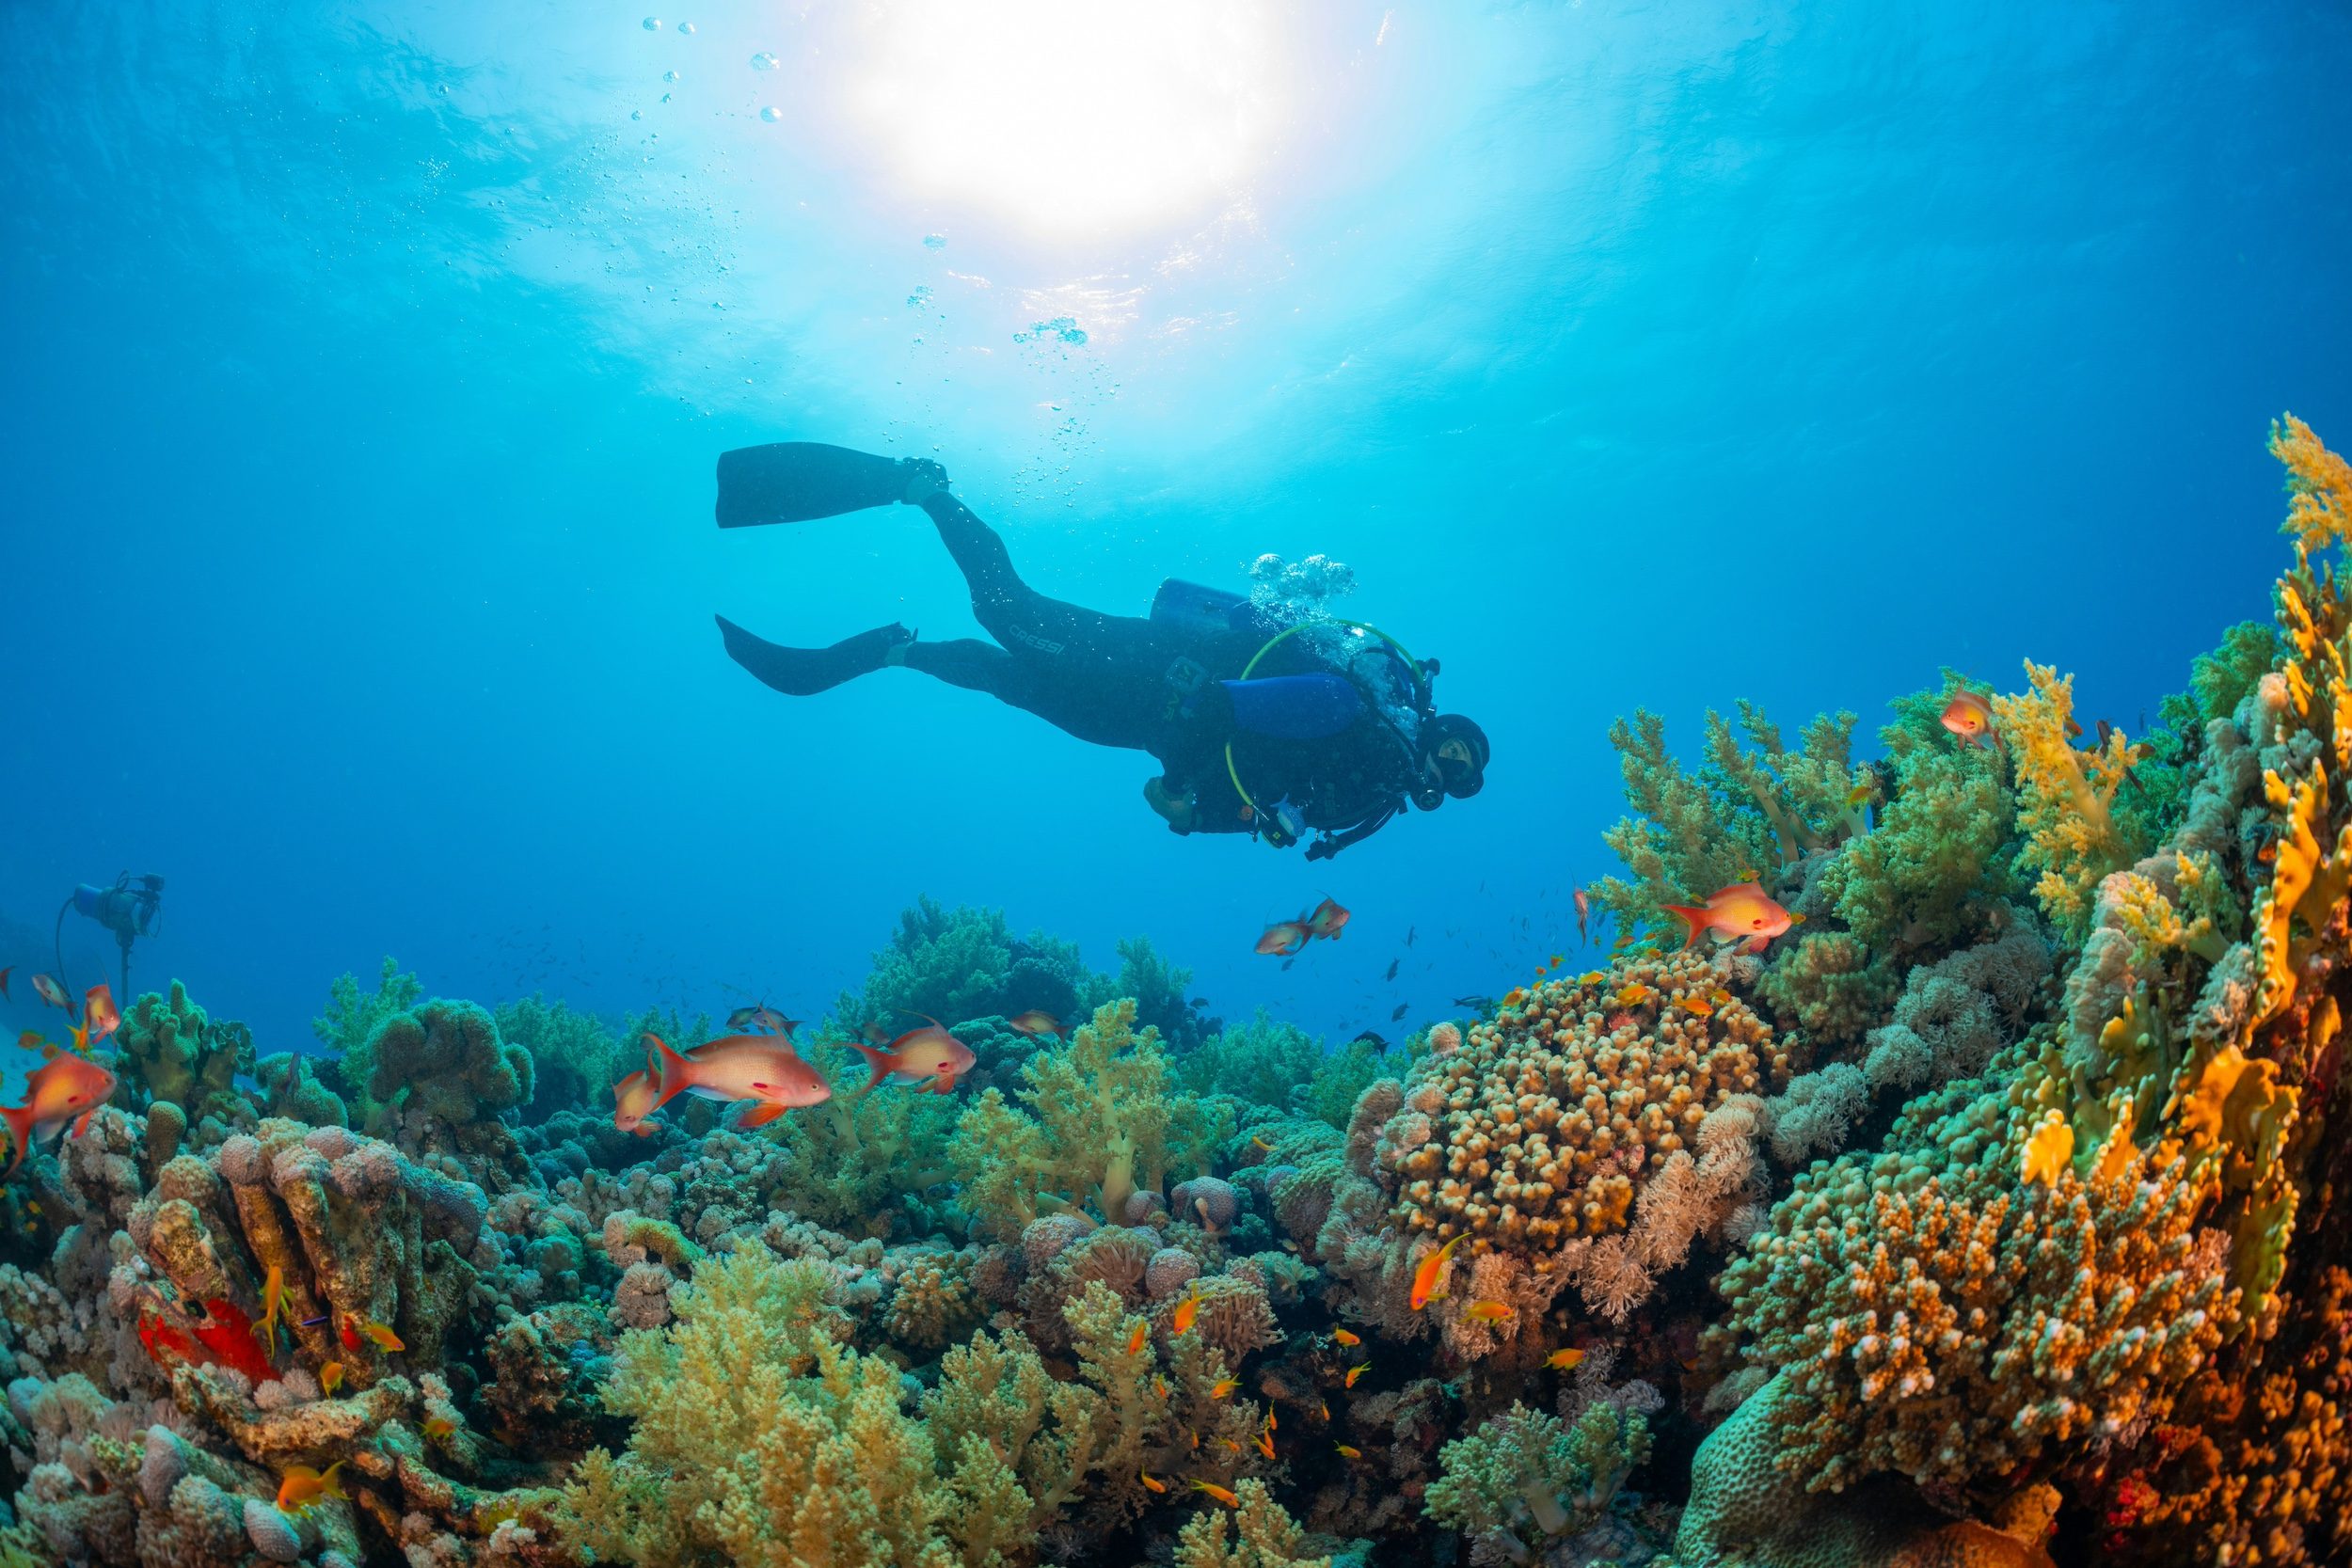 Nature, Outdoors, Water Neom says its coastal resorts will set a 'new global standard in luxury sustainable tourism' A diver enjoys the underwater beauty of Neom, which says its coastal resorts will set a 'new global standard in luxury sustainable tourism'